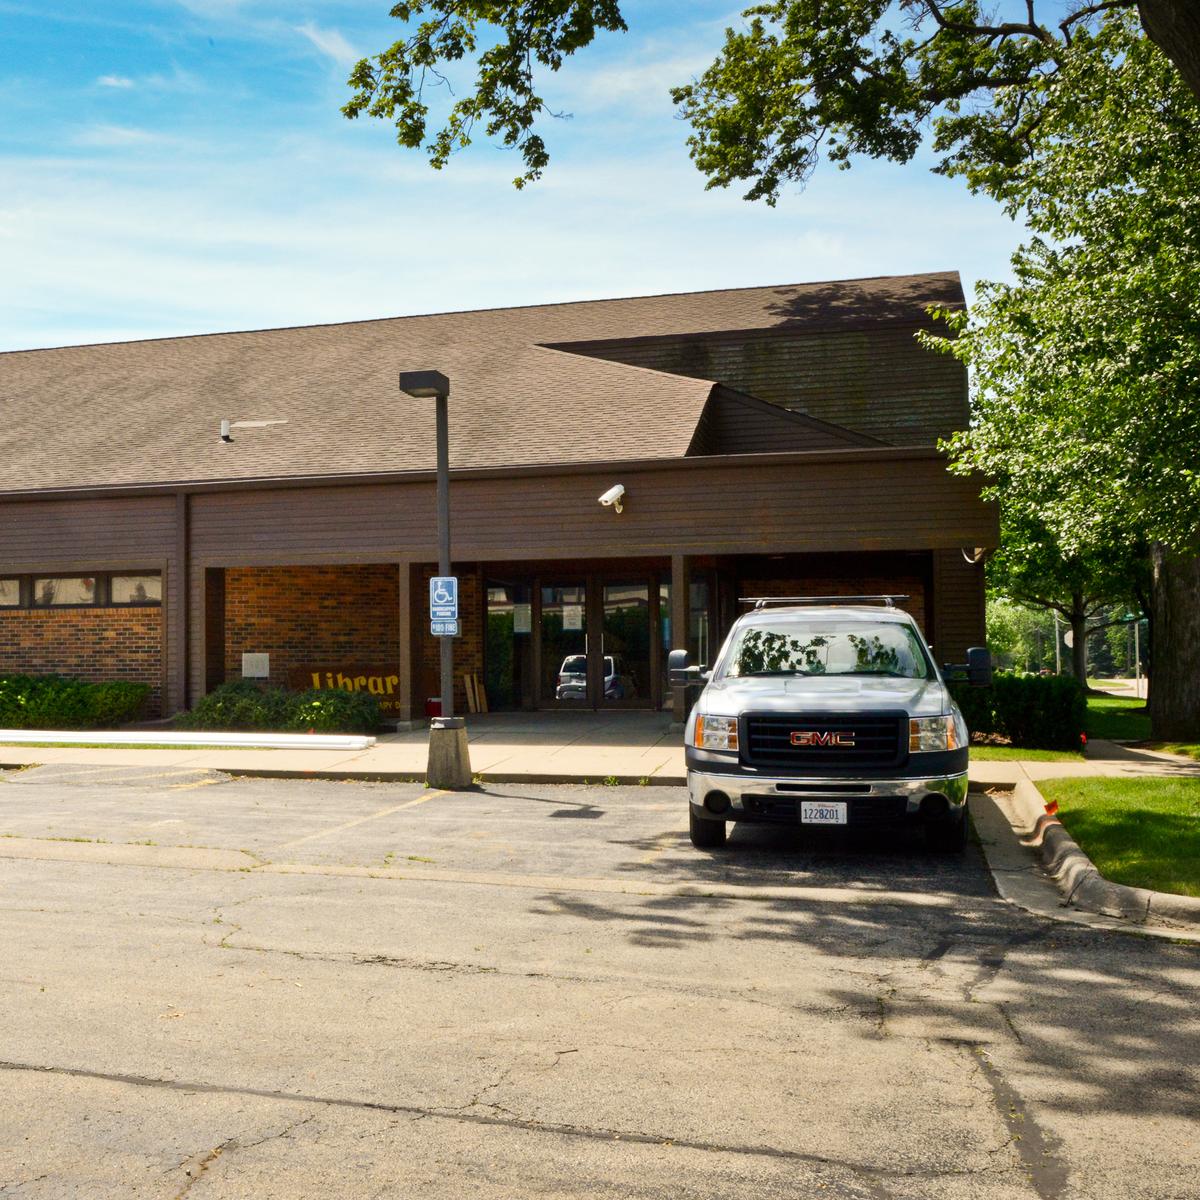 OSF Medical Group - Primary Care, 109 N. Franklin Street, Byron, Illinois, 61010